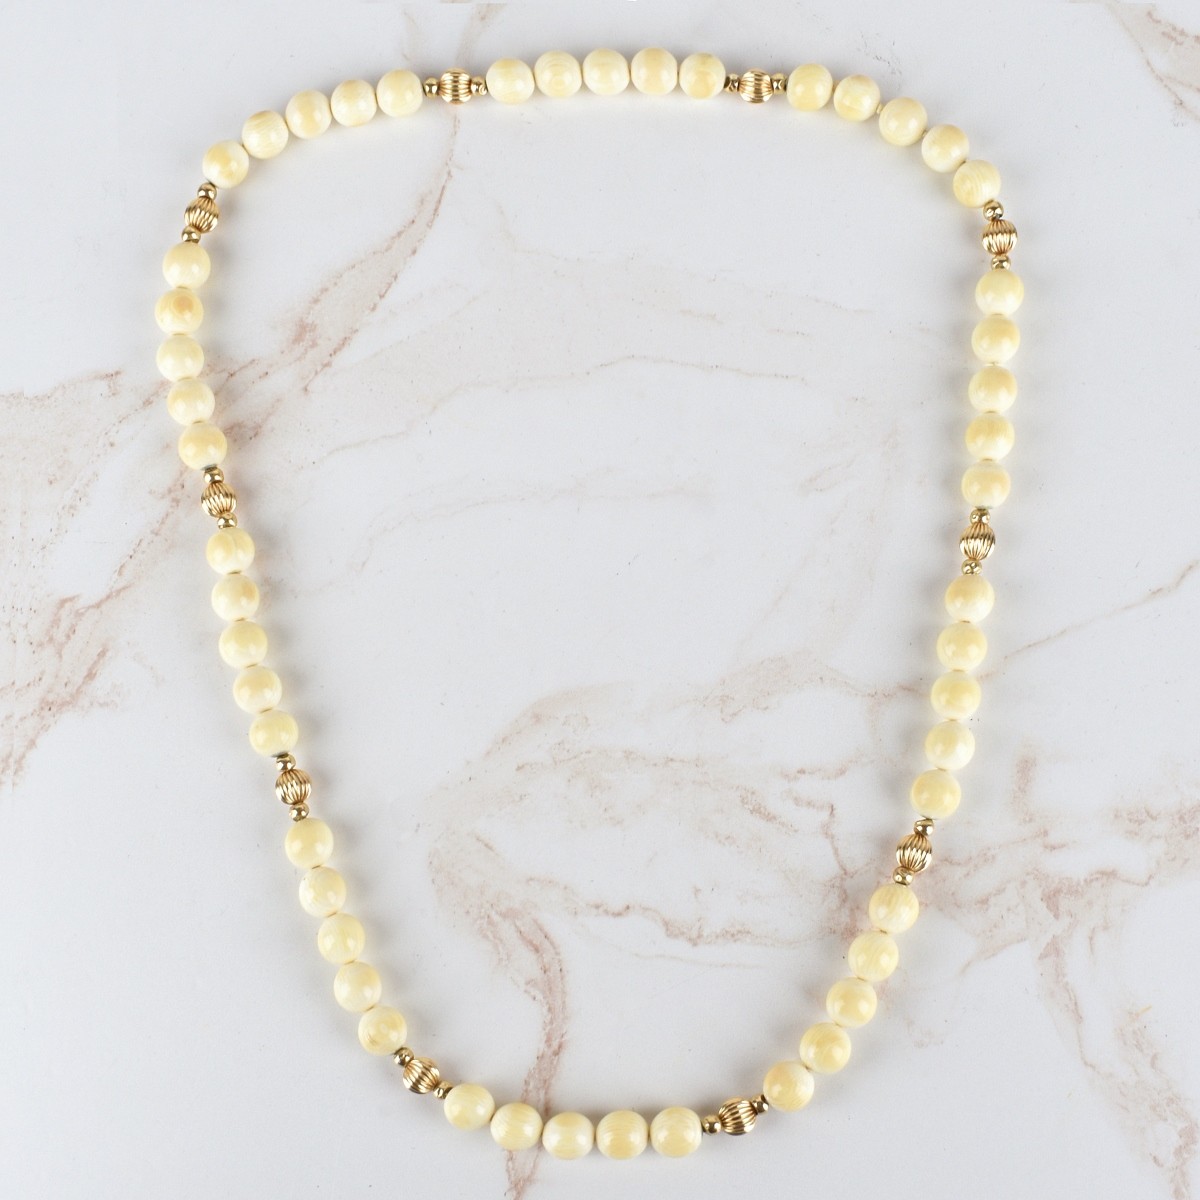 Bead and 14K Necklace